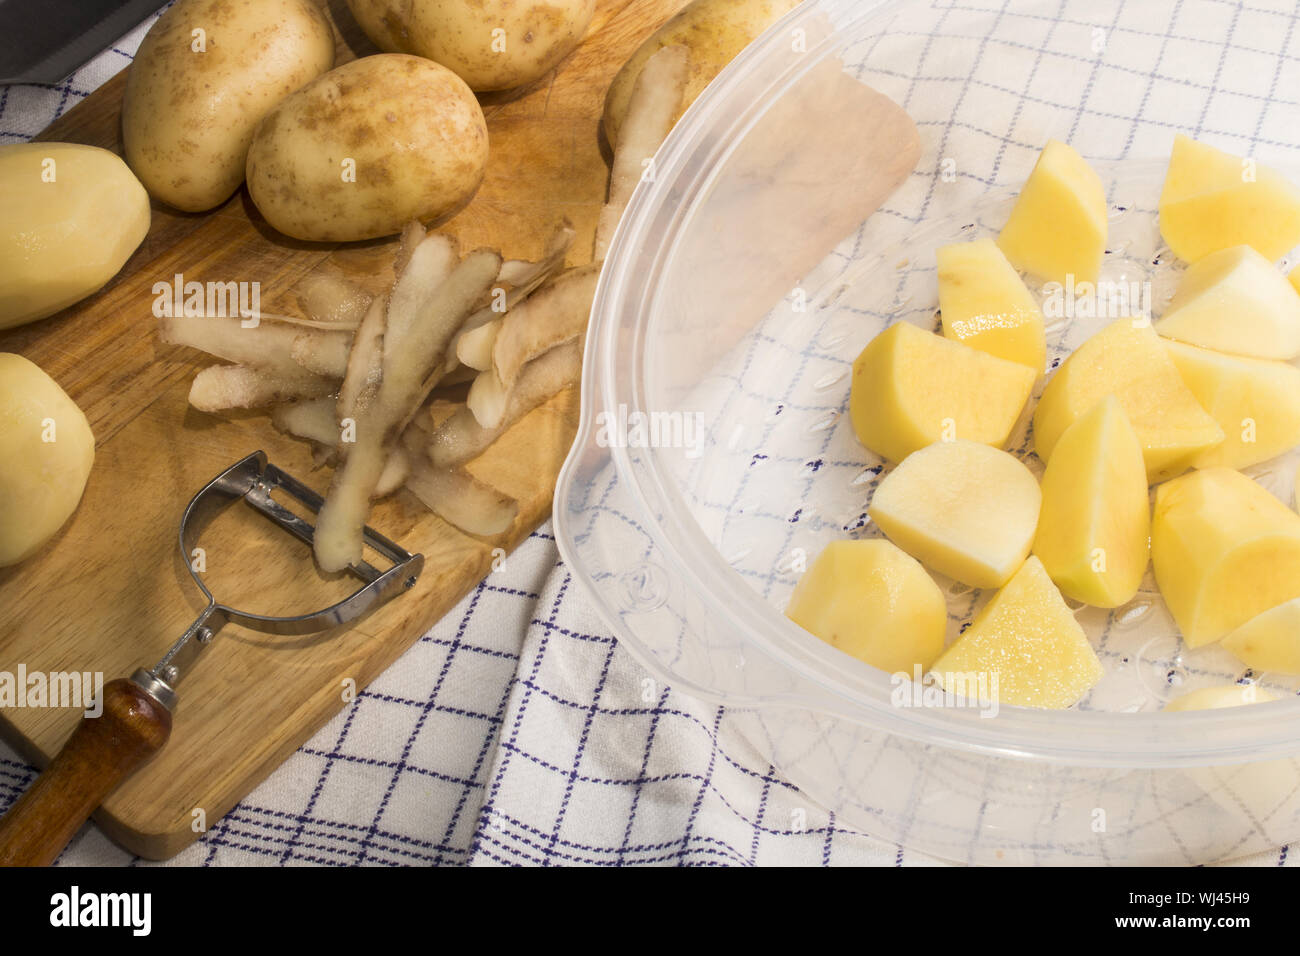 peeled and cut potatoes on a wooden board ready to boil in a steamer Stock Photo